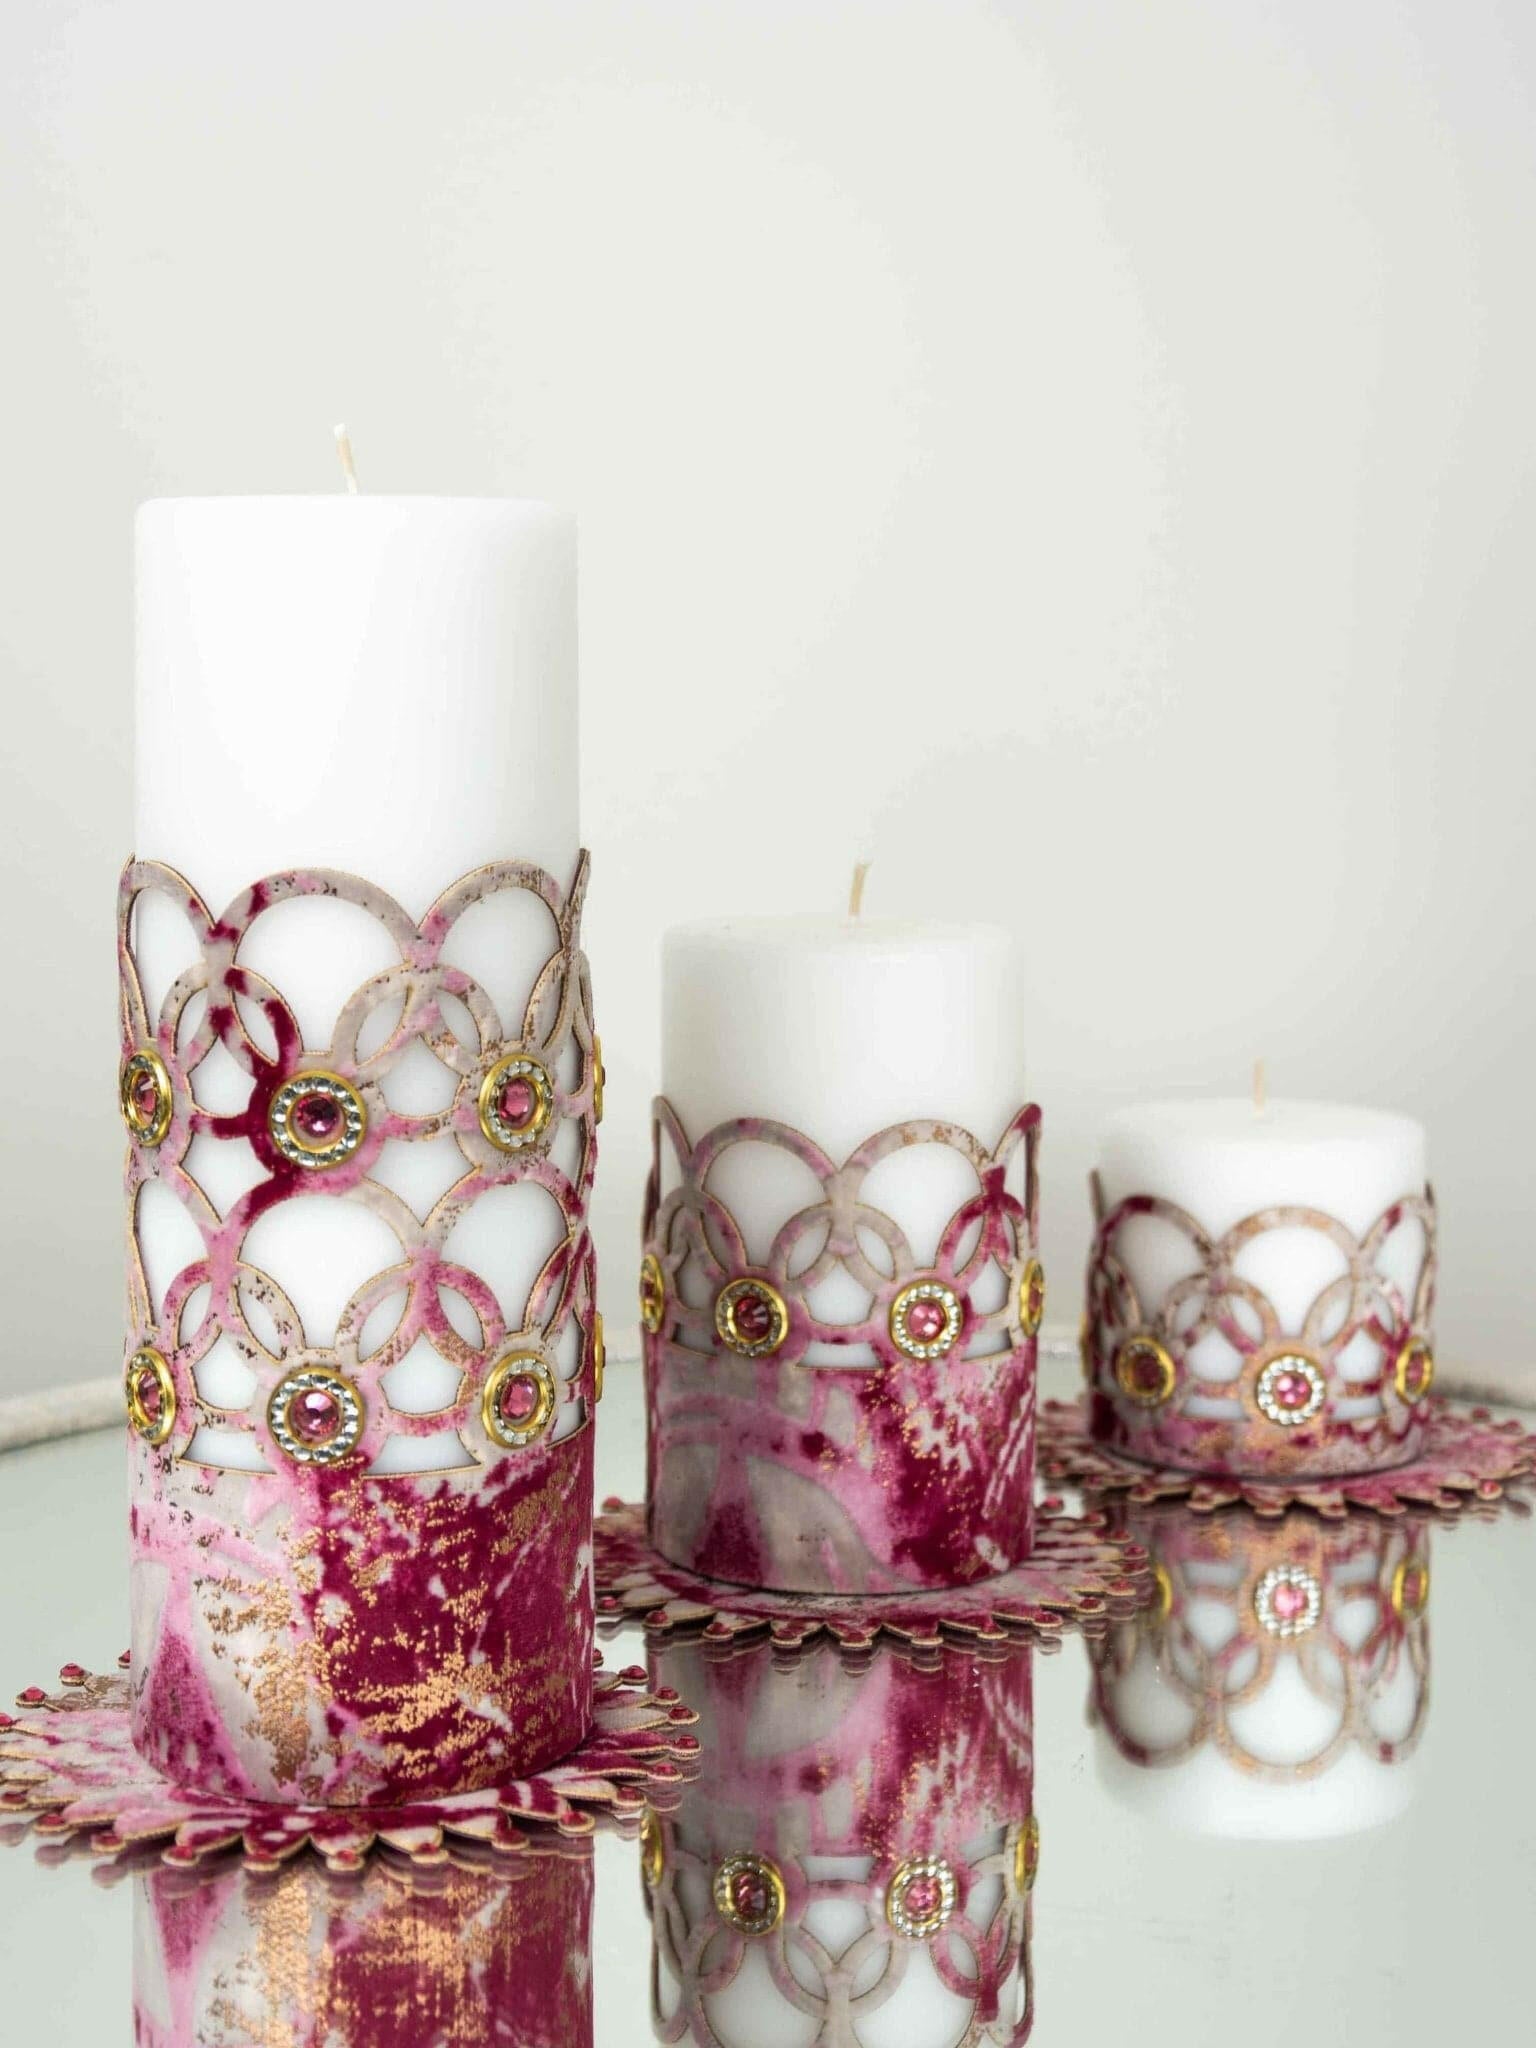 Zerre Pink Copper Luxury Candle Set of 3, Leather Circular Pattern, Decorative Glamorous Candles by Creative Home